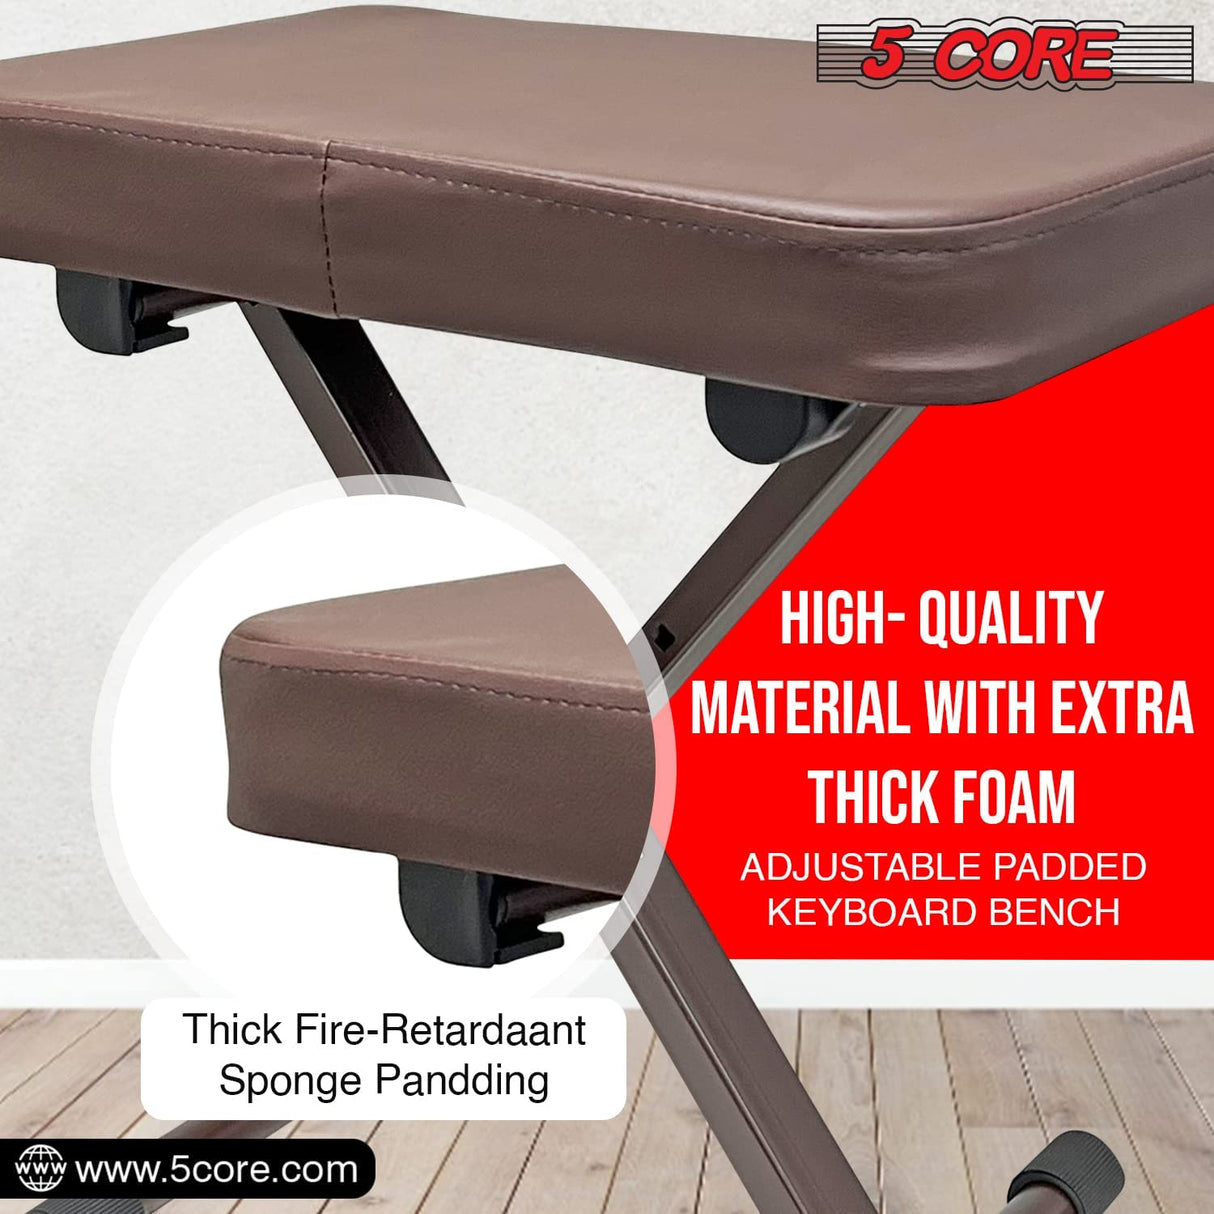 5 Core Keyboard Bench X-Style Cushion Padded Piano Bench 4 Levels of Height Adjustable Stool Chair Seat Flame Retardant Cotton Non-Skid Design Brown  KBB BR HD